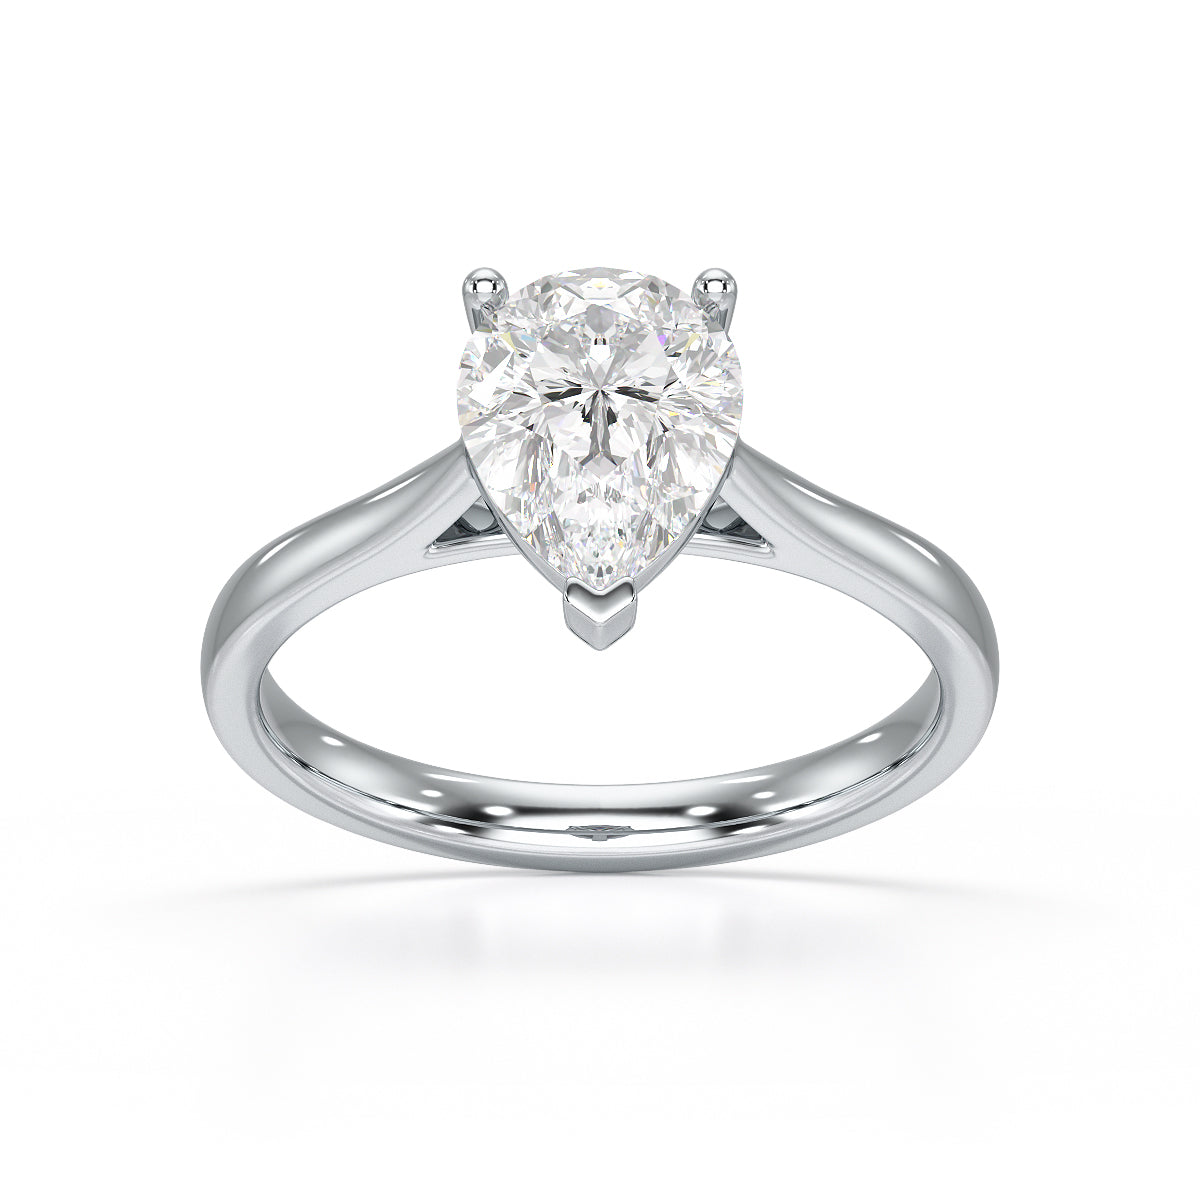 Diamond Engagement Ring- Pear Shaped Solitaire With Tapered Shoulders